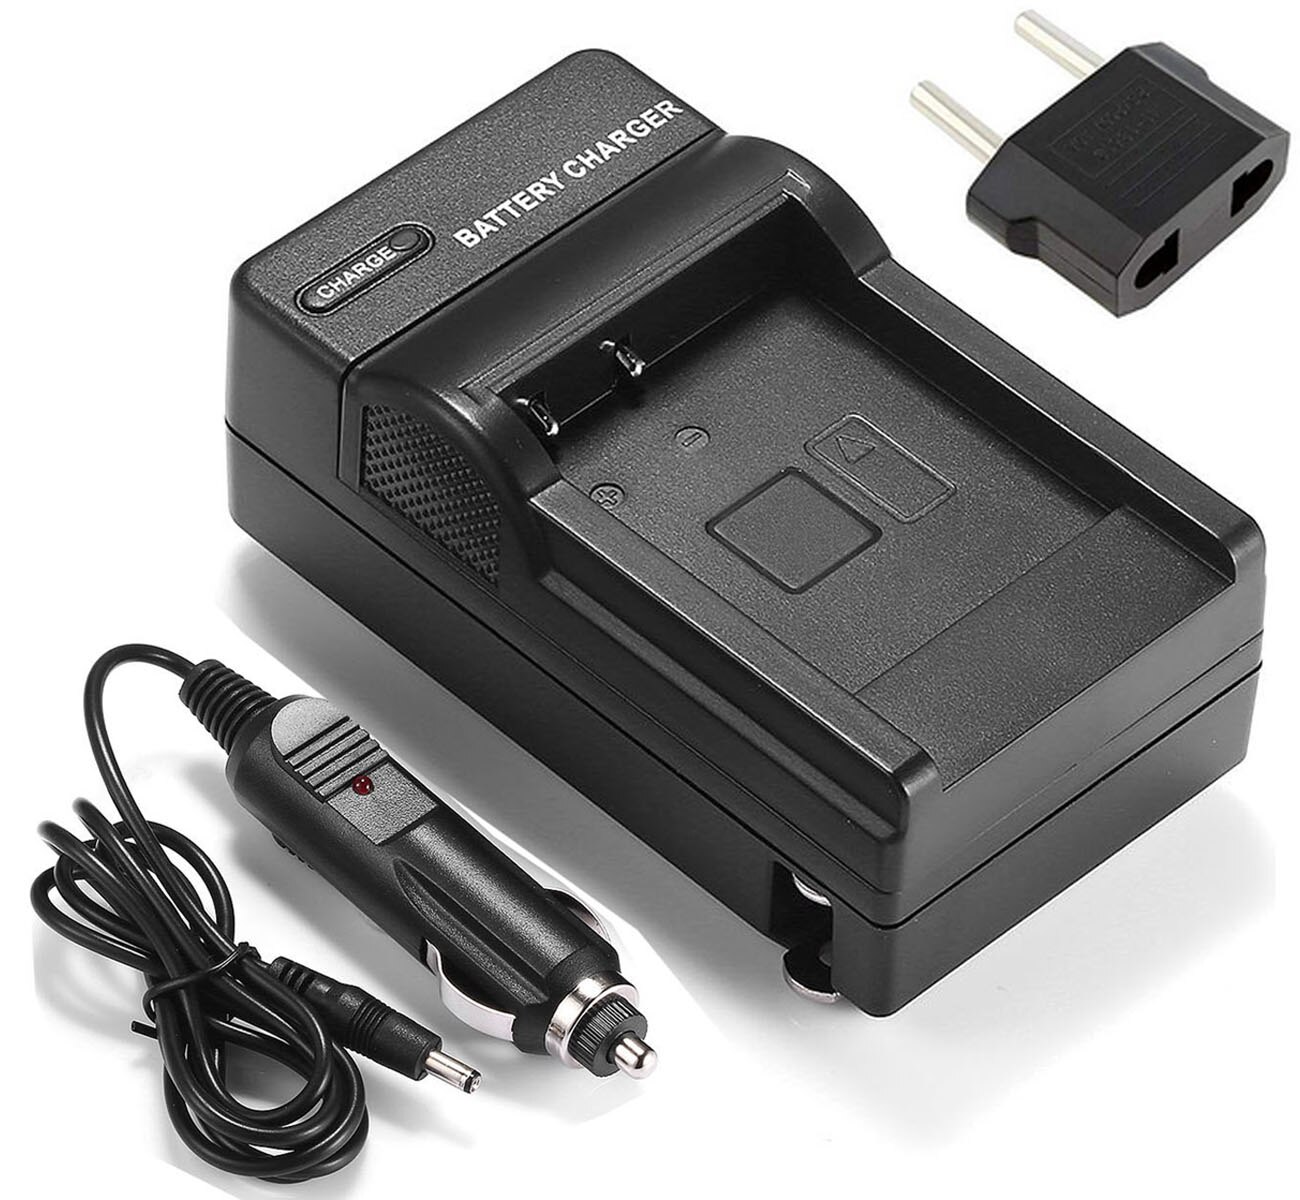 Batterij Lader Voor Nikon Coolpix AW110s, AW120s, AW130s, W300, B600, A900, A1000 Digitale Camera: Wall and Car Charger